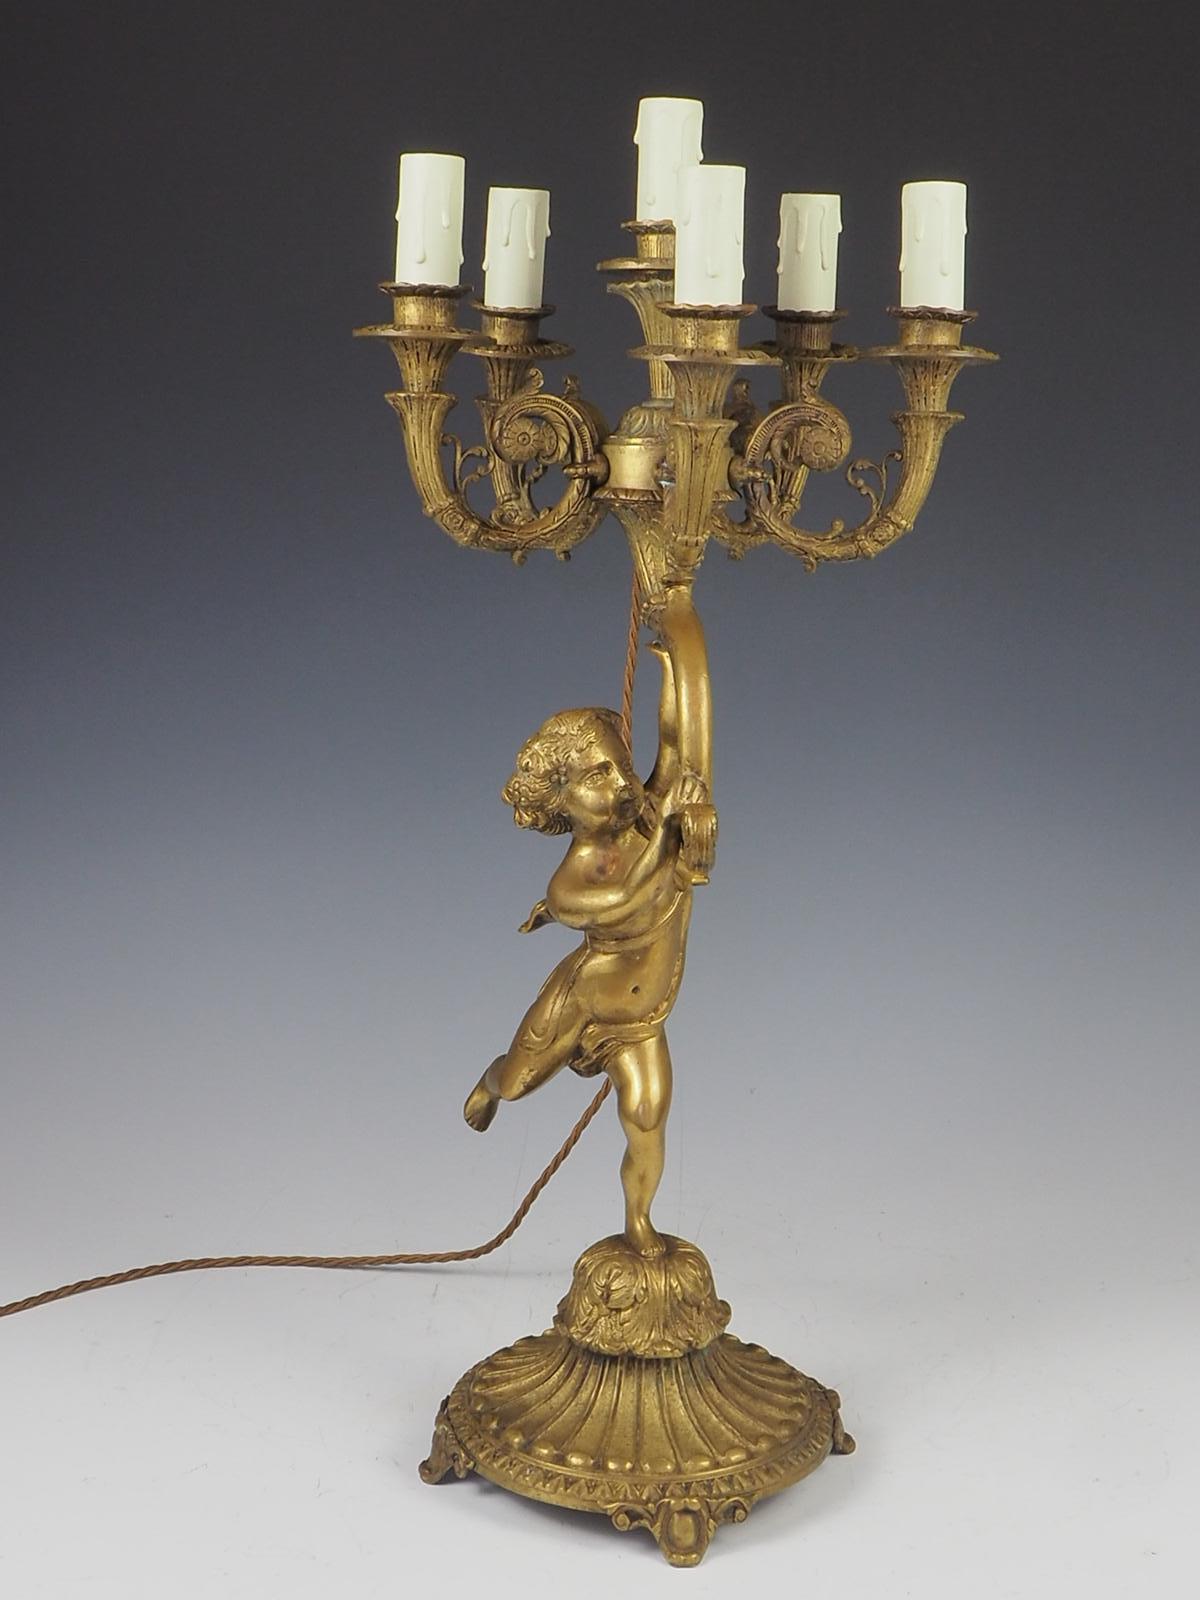 Antique brass Cherub 6 light candelabra lamp

A gorgeous antique candelabra table lamp. This was owned originally by Stobo Castle, Scotland before new owners took it over and made the venue into a luxury spa

The quality is lovely, this is cast